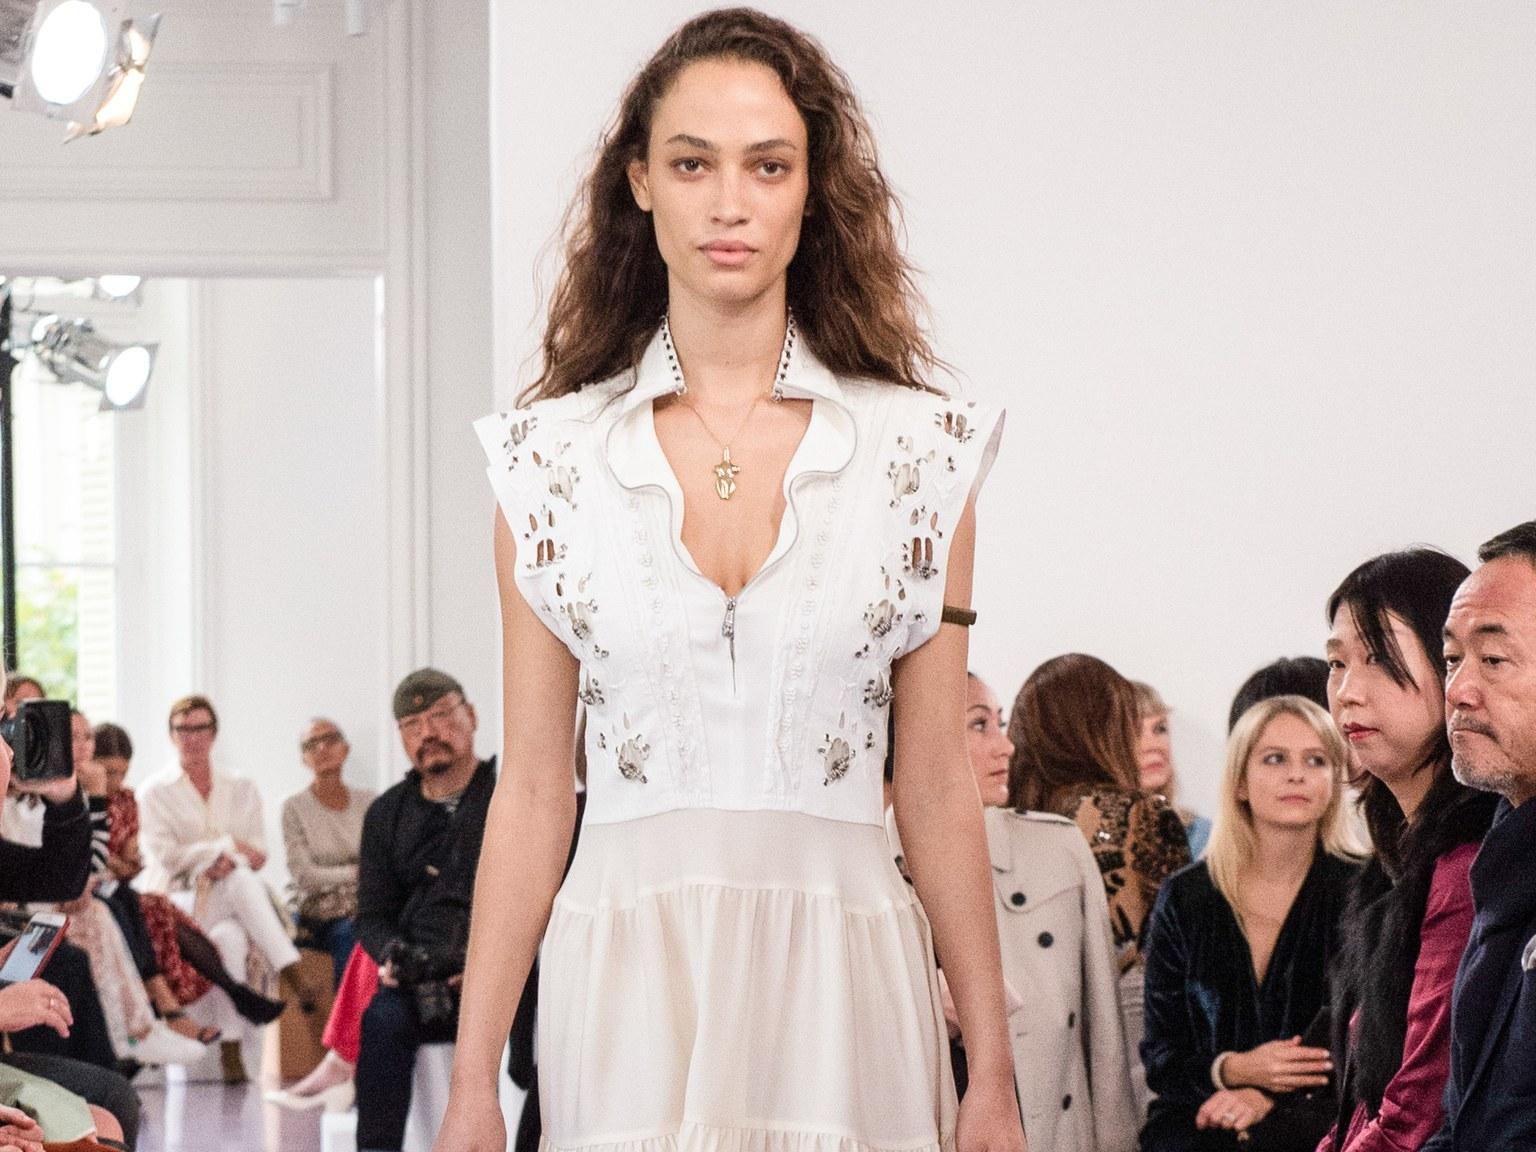 Model Sophie Koella on Why Getting Cast to Open the Chloé Show Was a